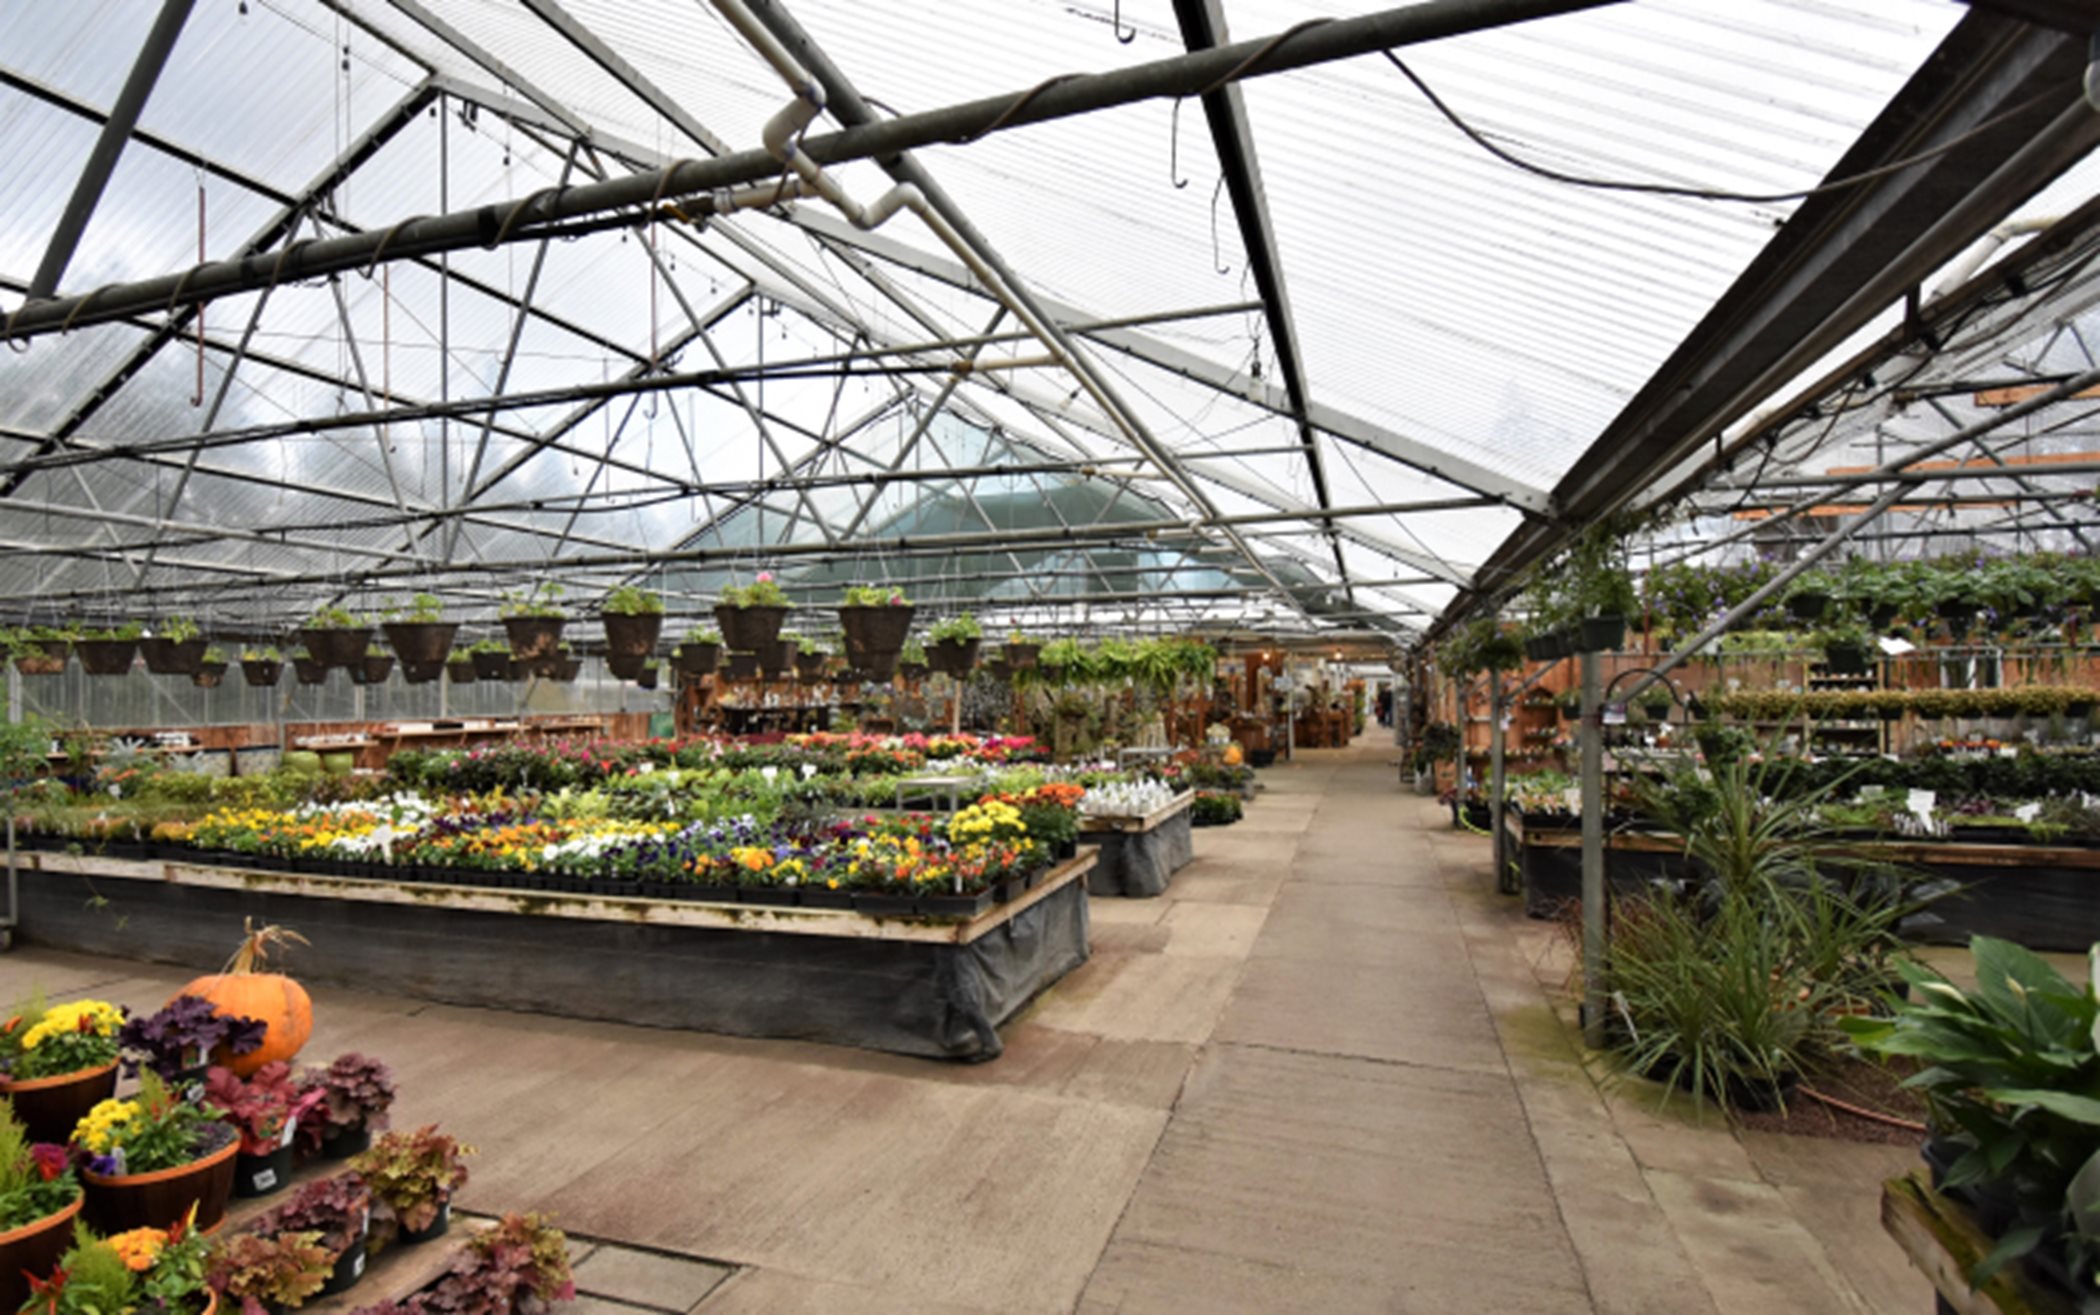 Interior of greenhouse with plants